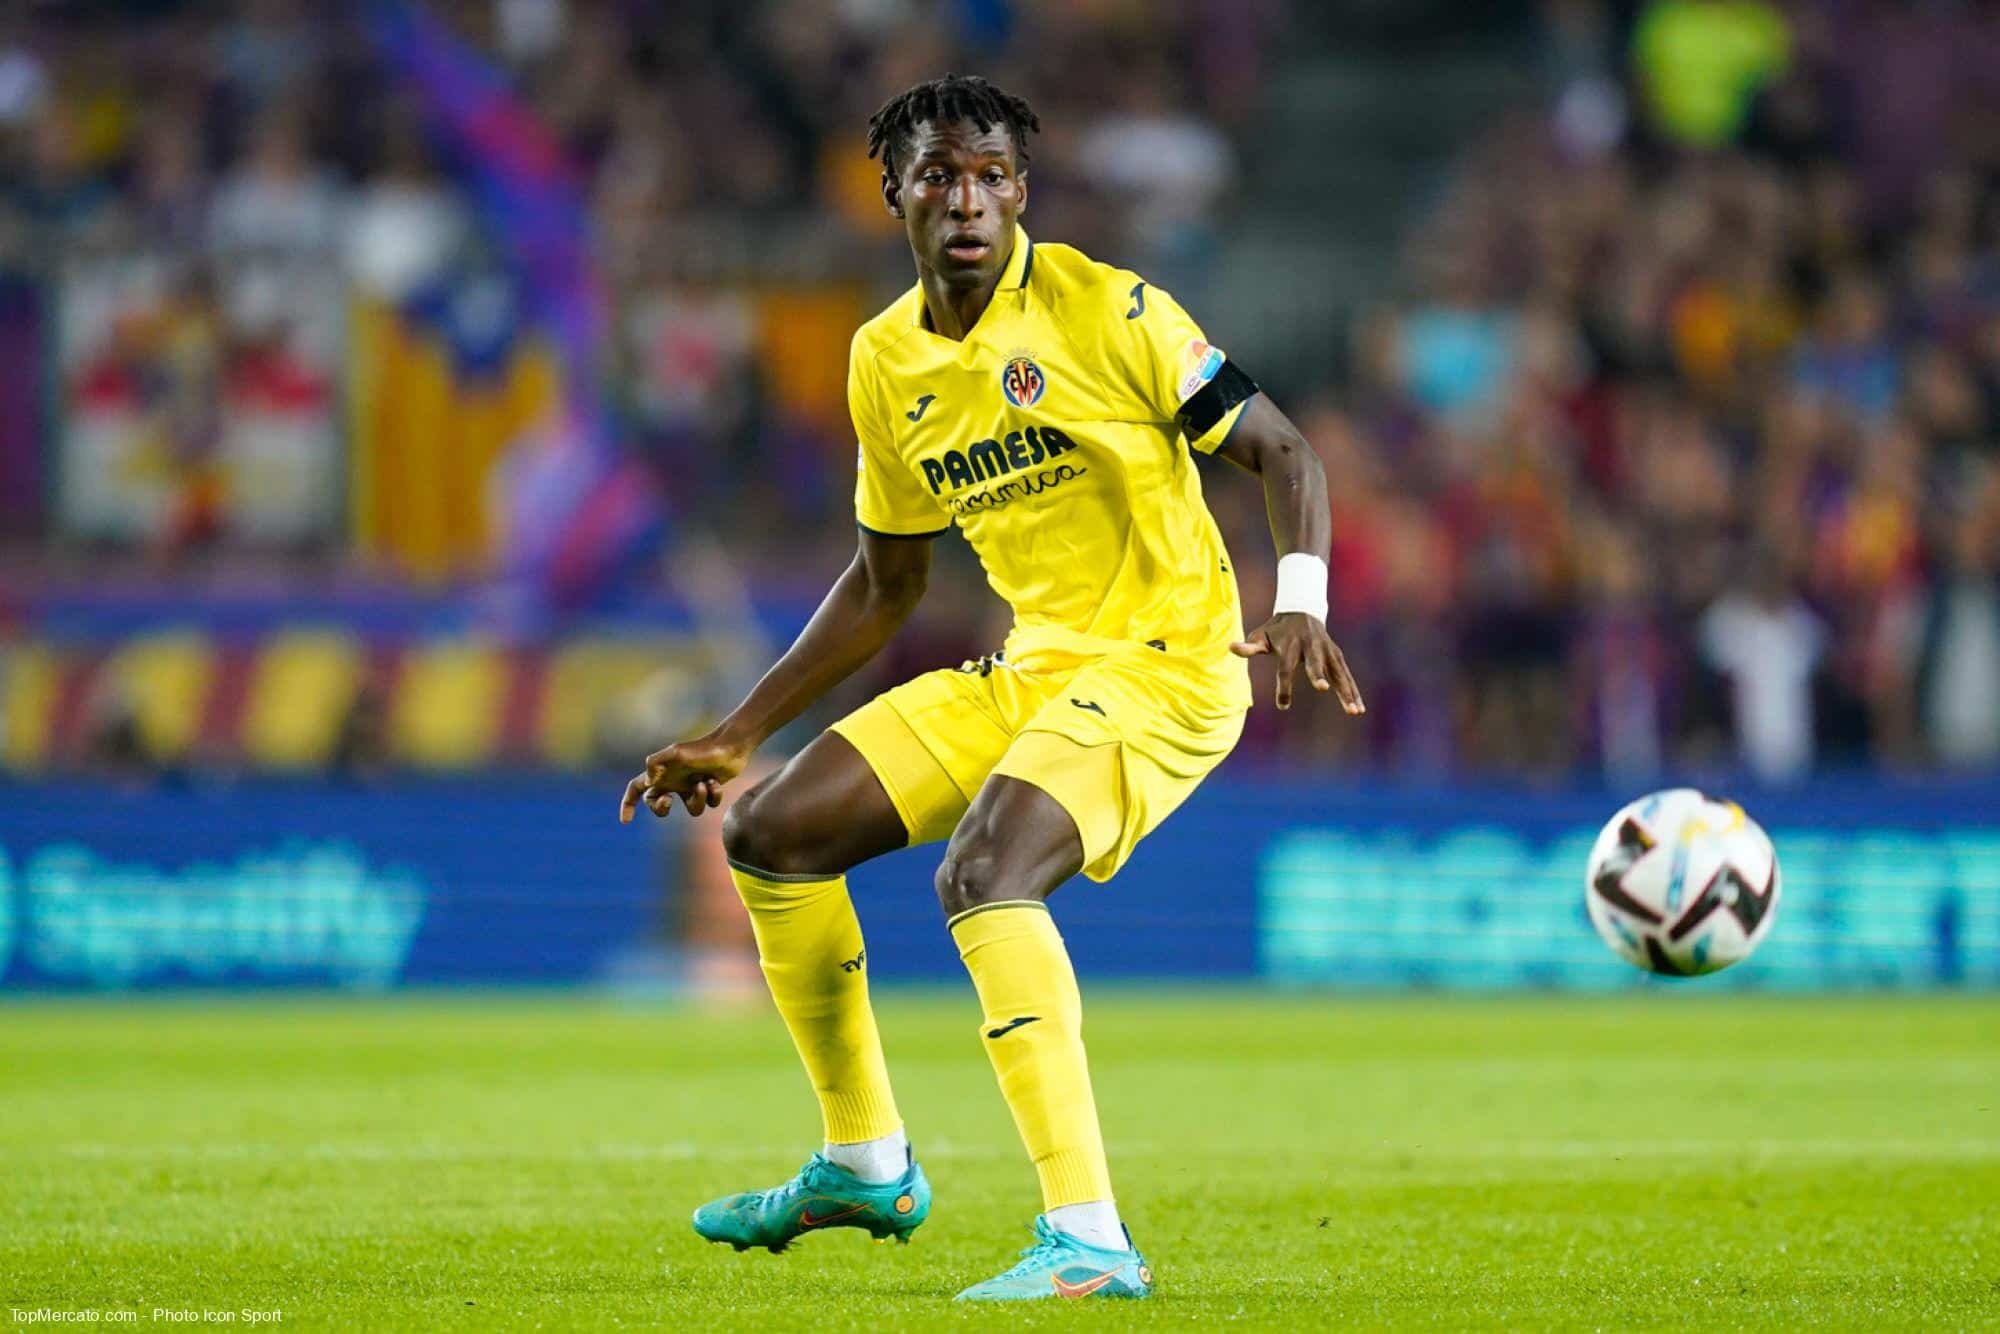 Villareal forward wanted by Premier League clubs